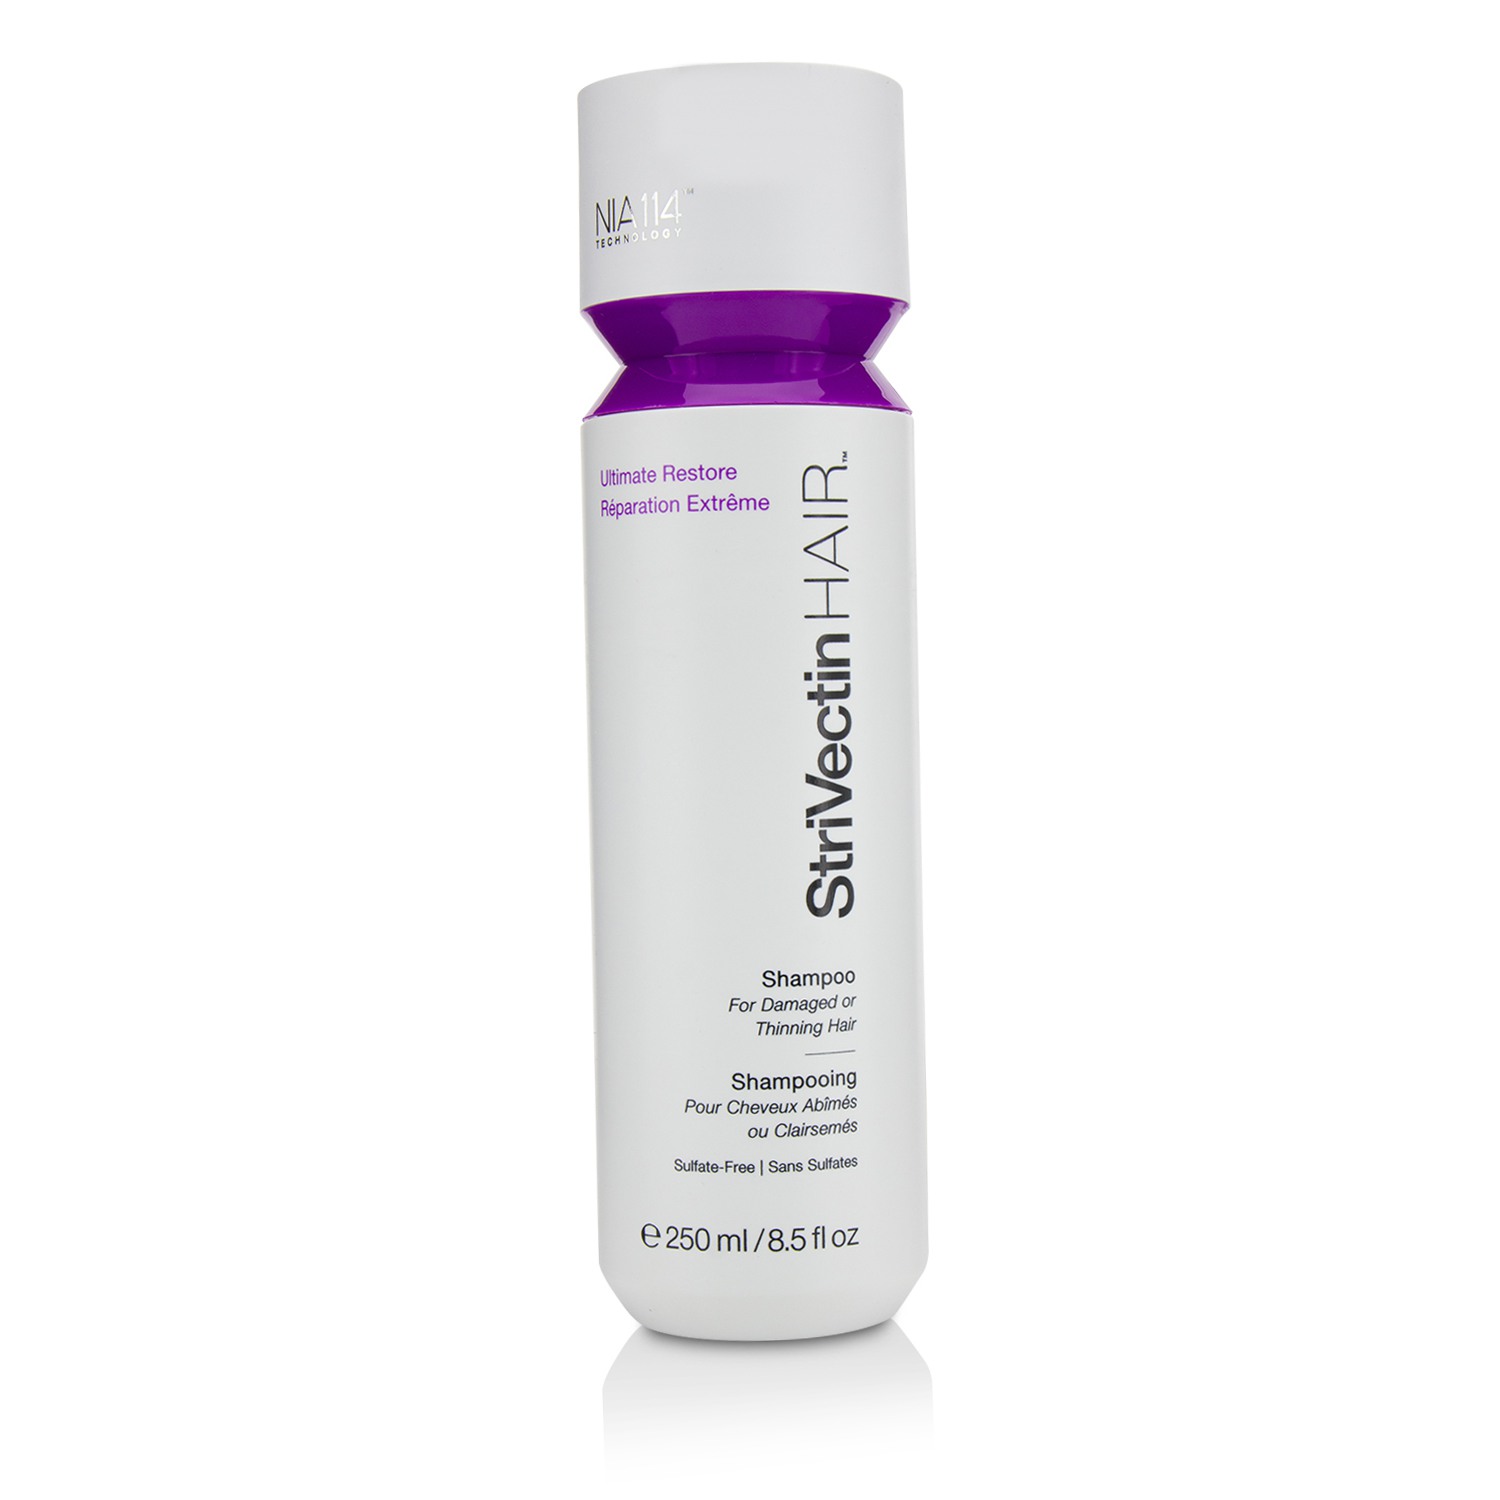 Ultimate Restore Shampoo (For Damaged or Thinning Hair) StriVectin Image